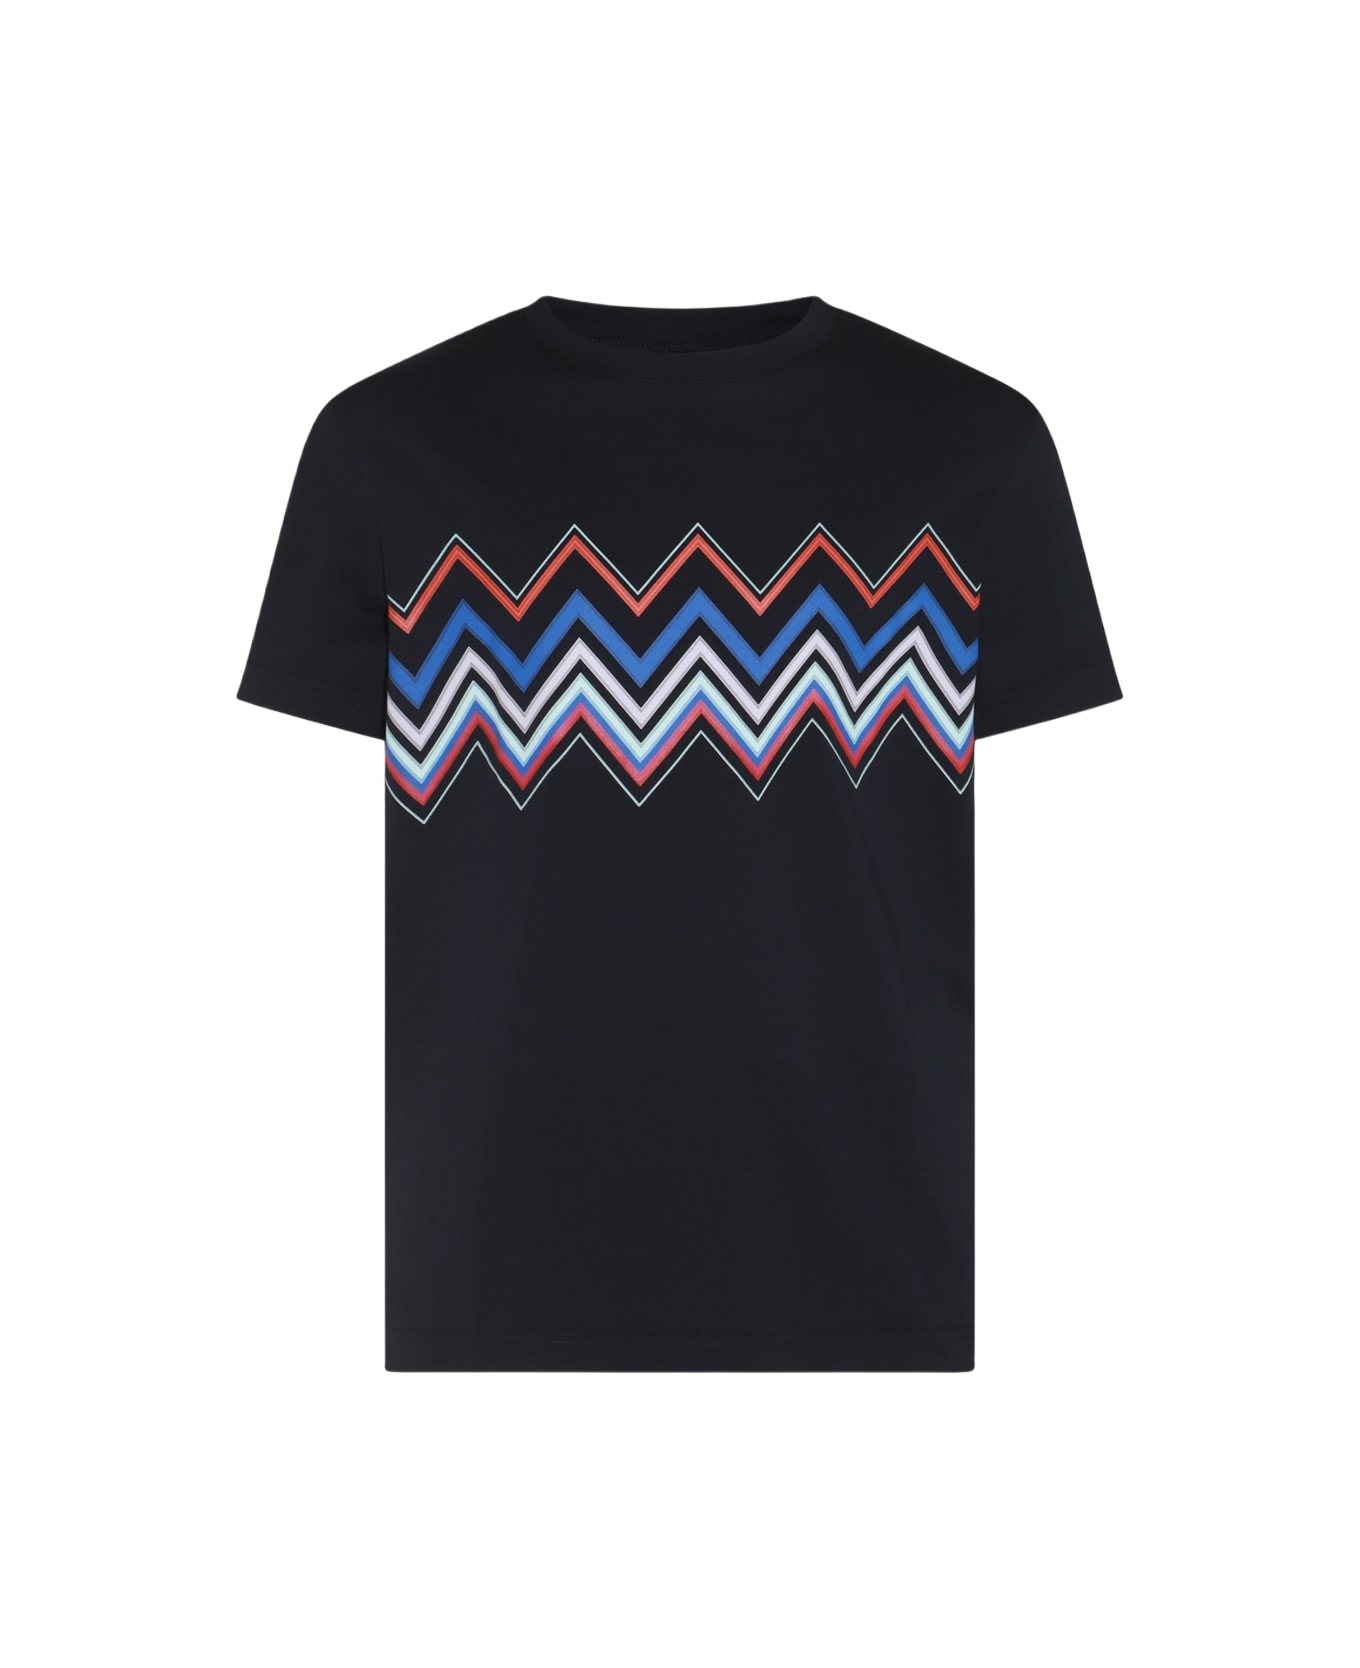 Missoni Blue Multicolor Cotton T-shirt - NAVY BASE WITH RED BLUE